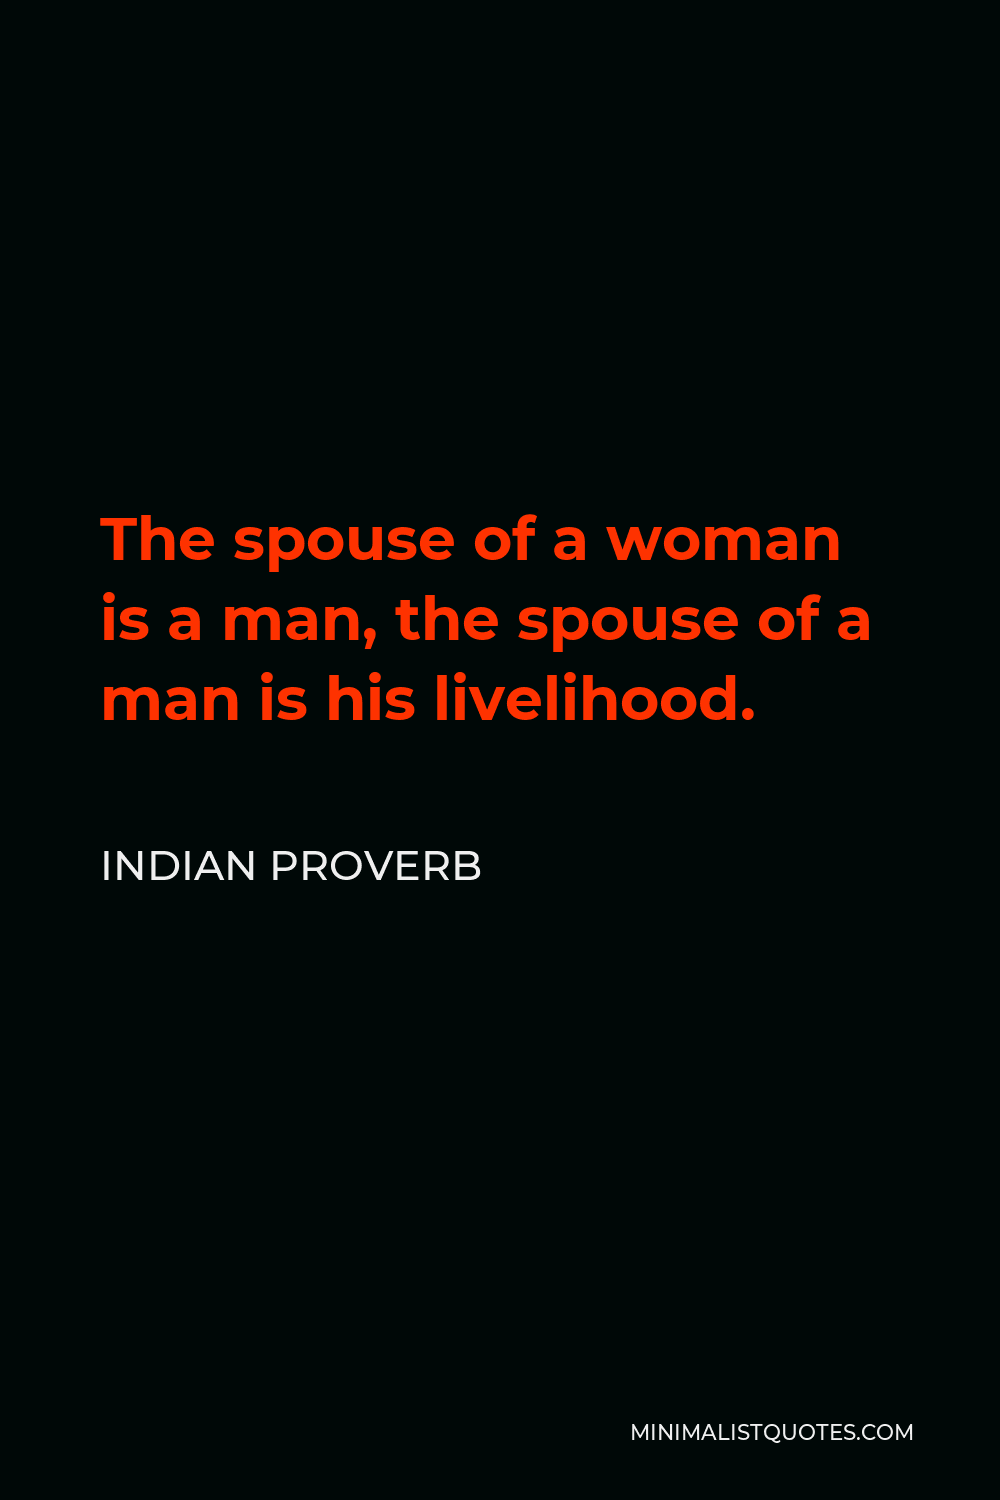 Indian Proverb Quote - The spouse of a woman is a man, the spouse of a man is his livelihood.